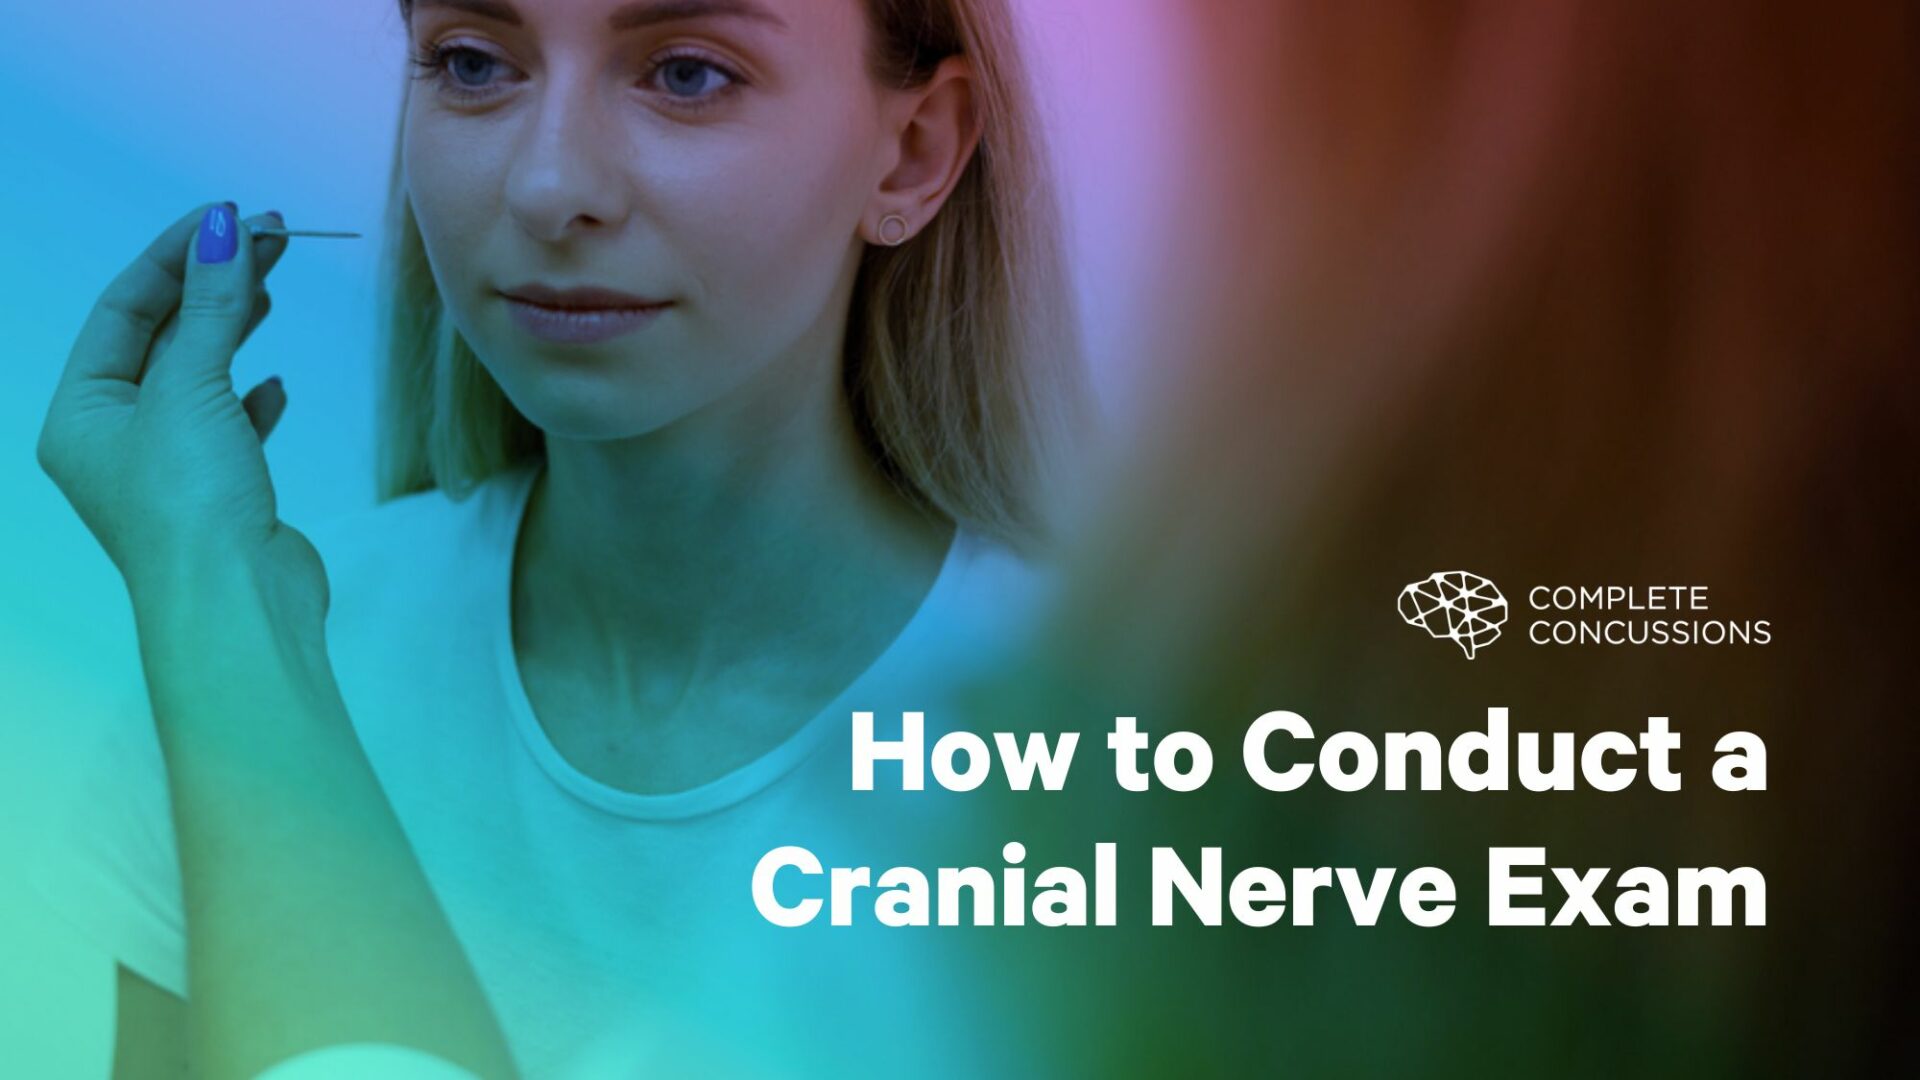 How to Conduct a Cranial Nerve Exam